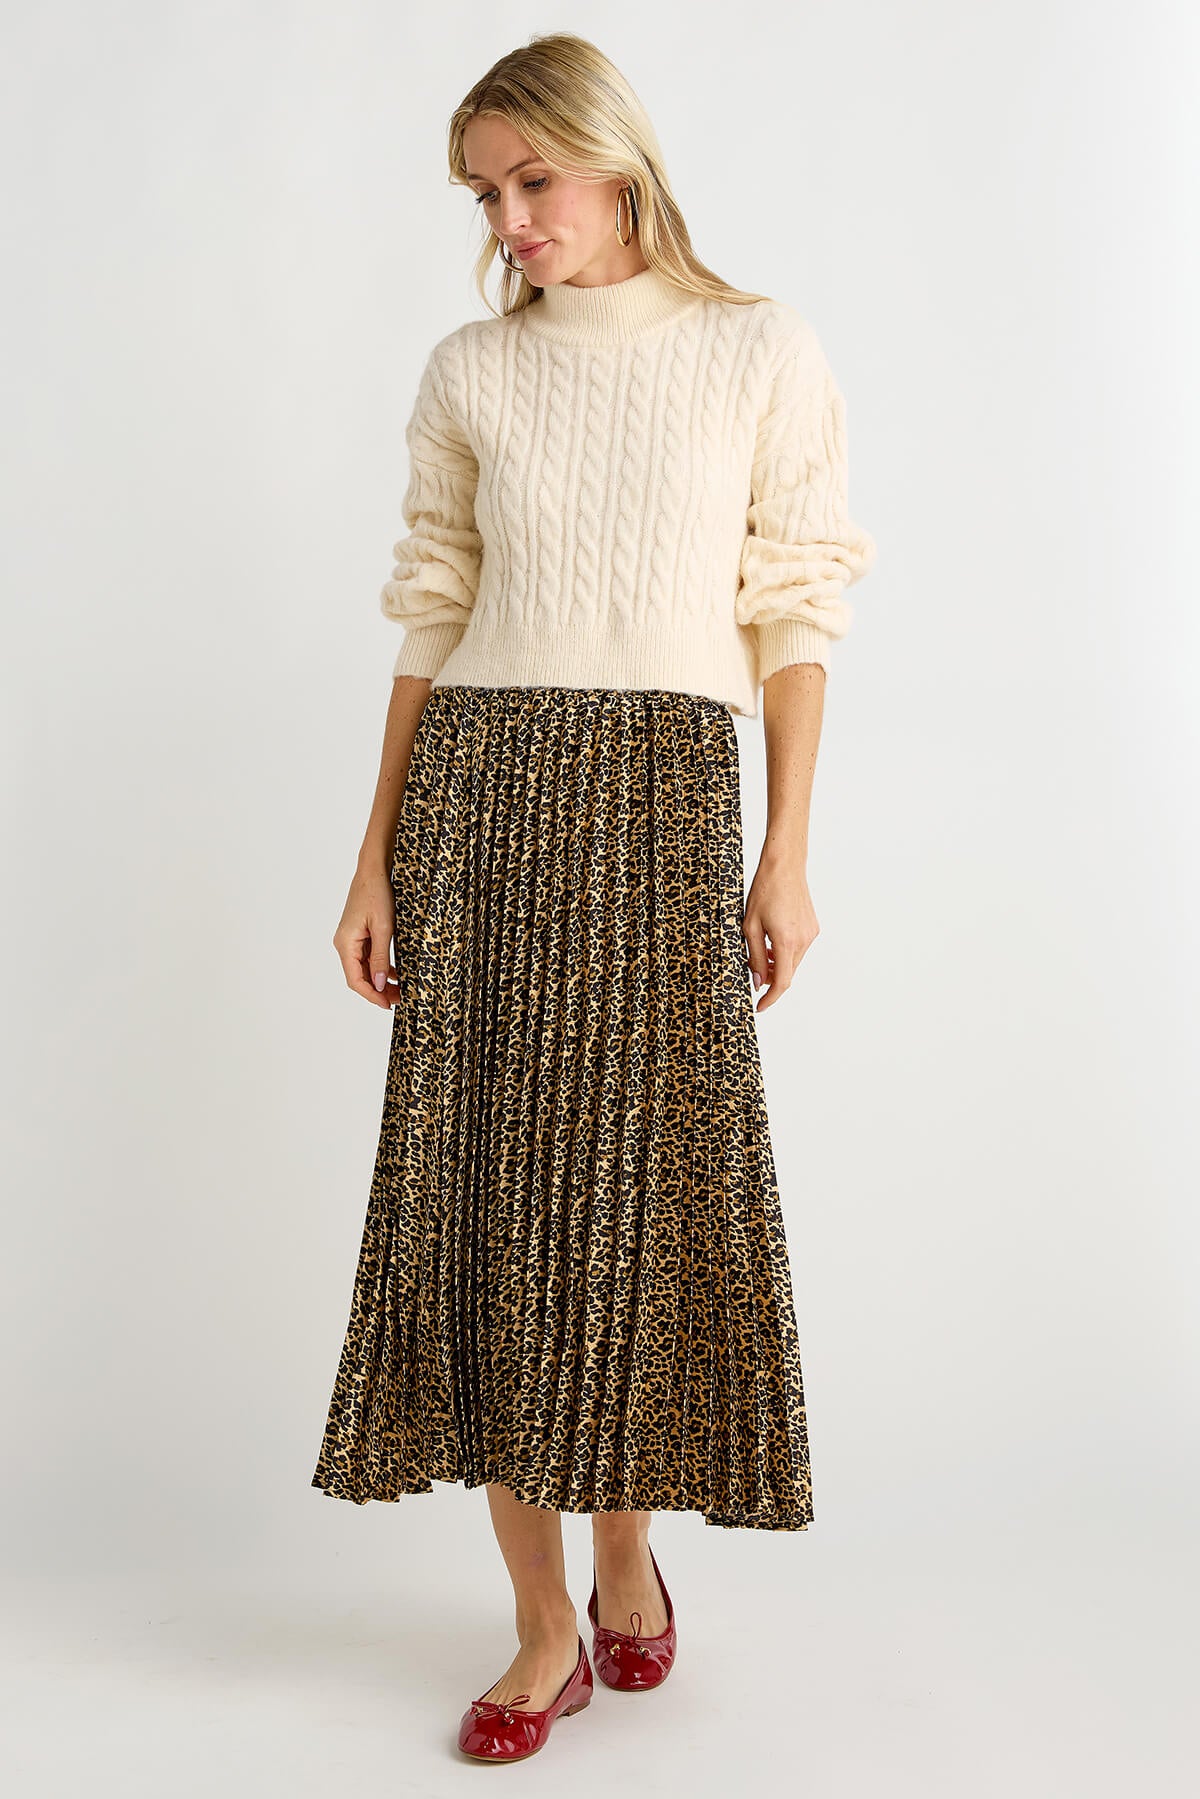 RD Style Pleated Leopard Skirt